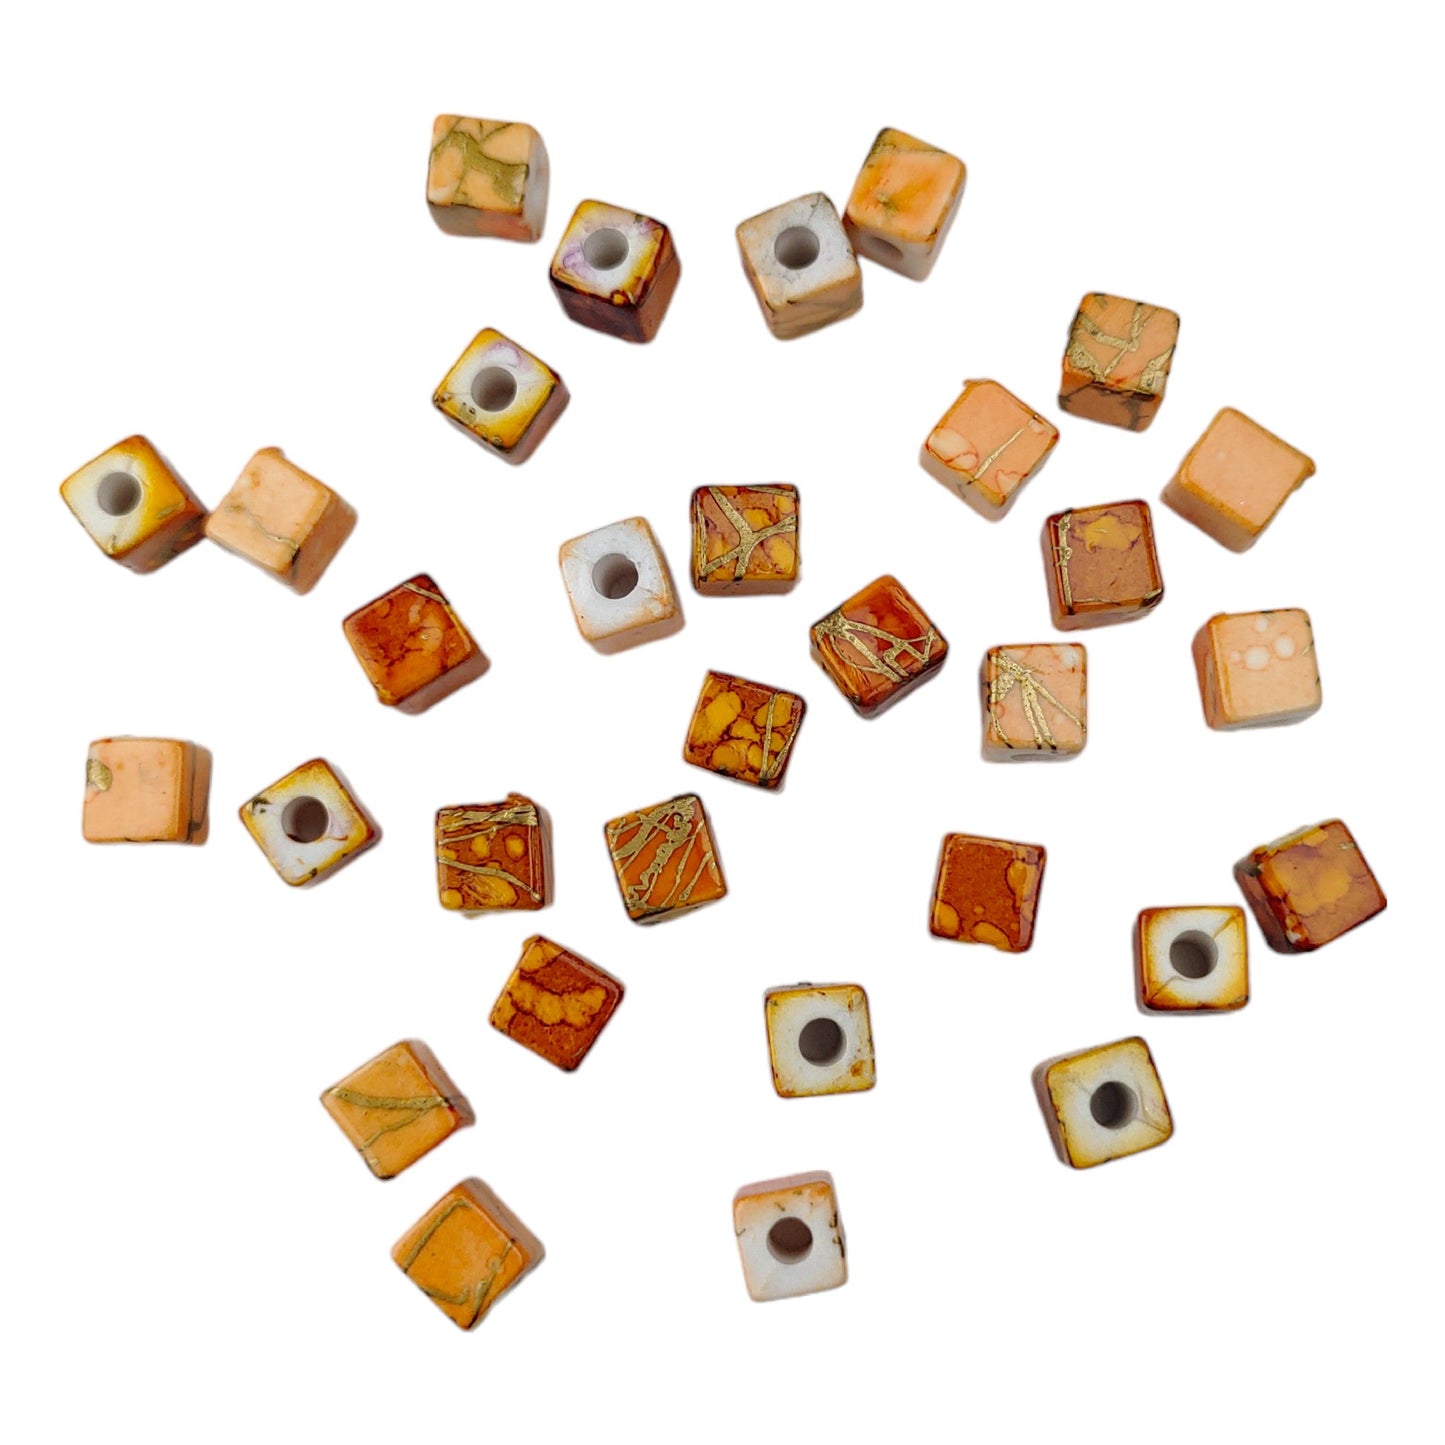 Indian Petals Square Shape Designer Colored Motif Beads For Craft or décor -11701